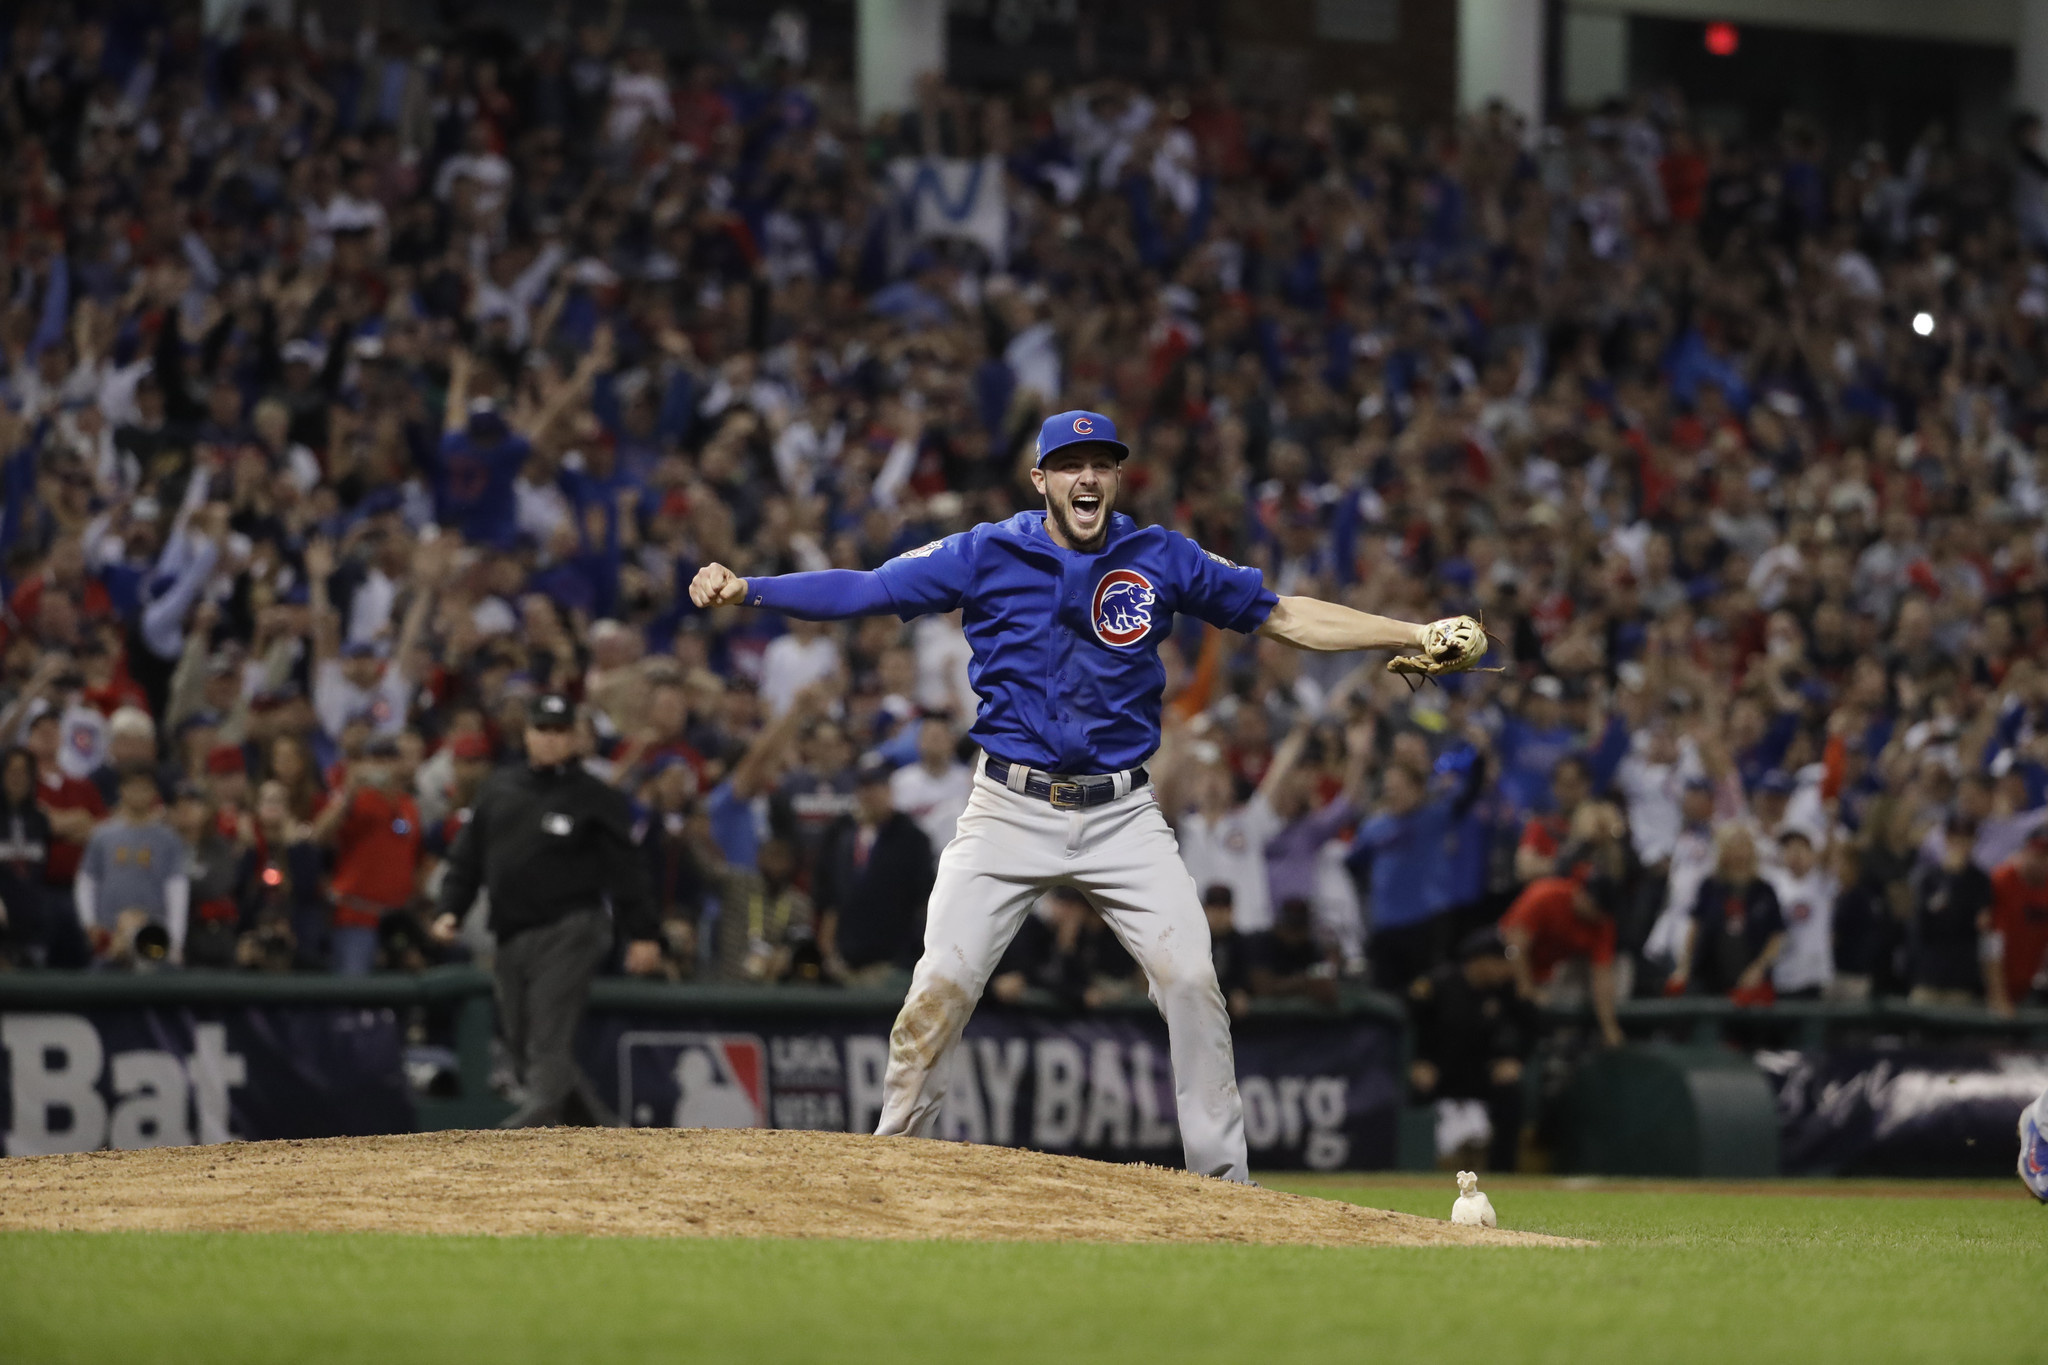 7. The Cubs Win the World Series – Chicago Magazine